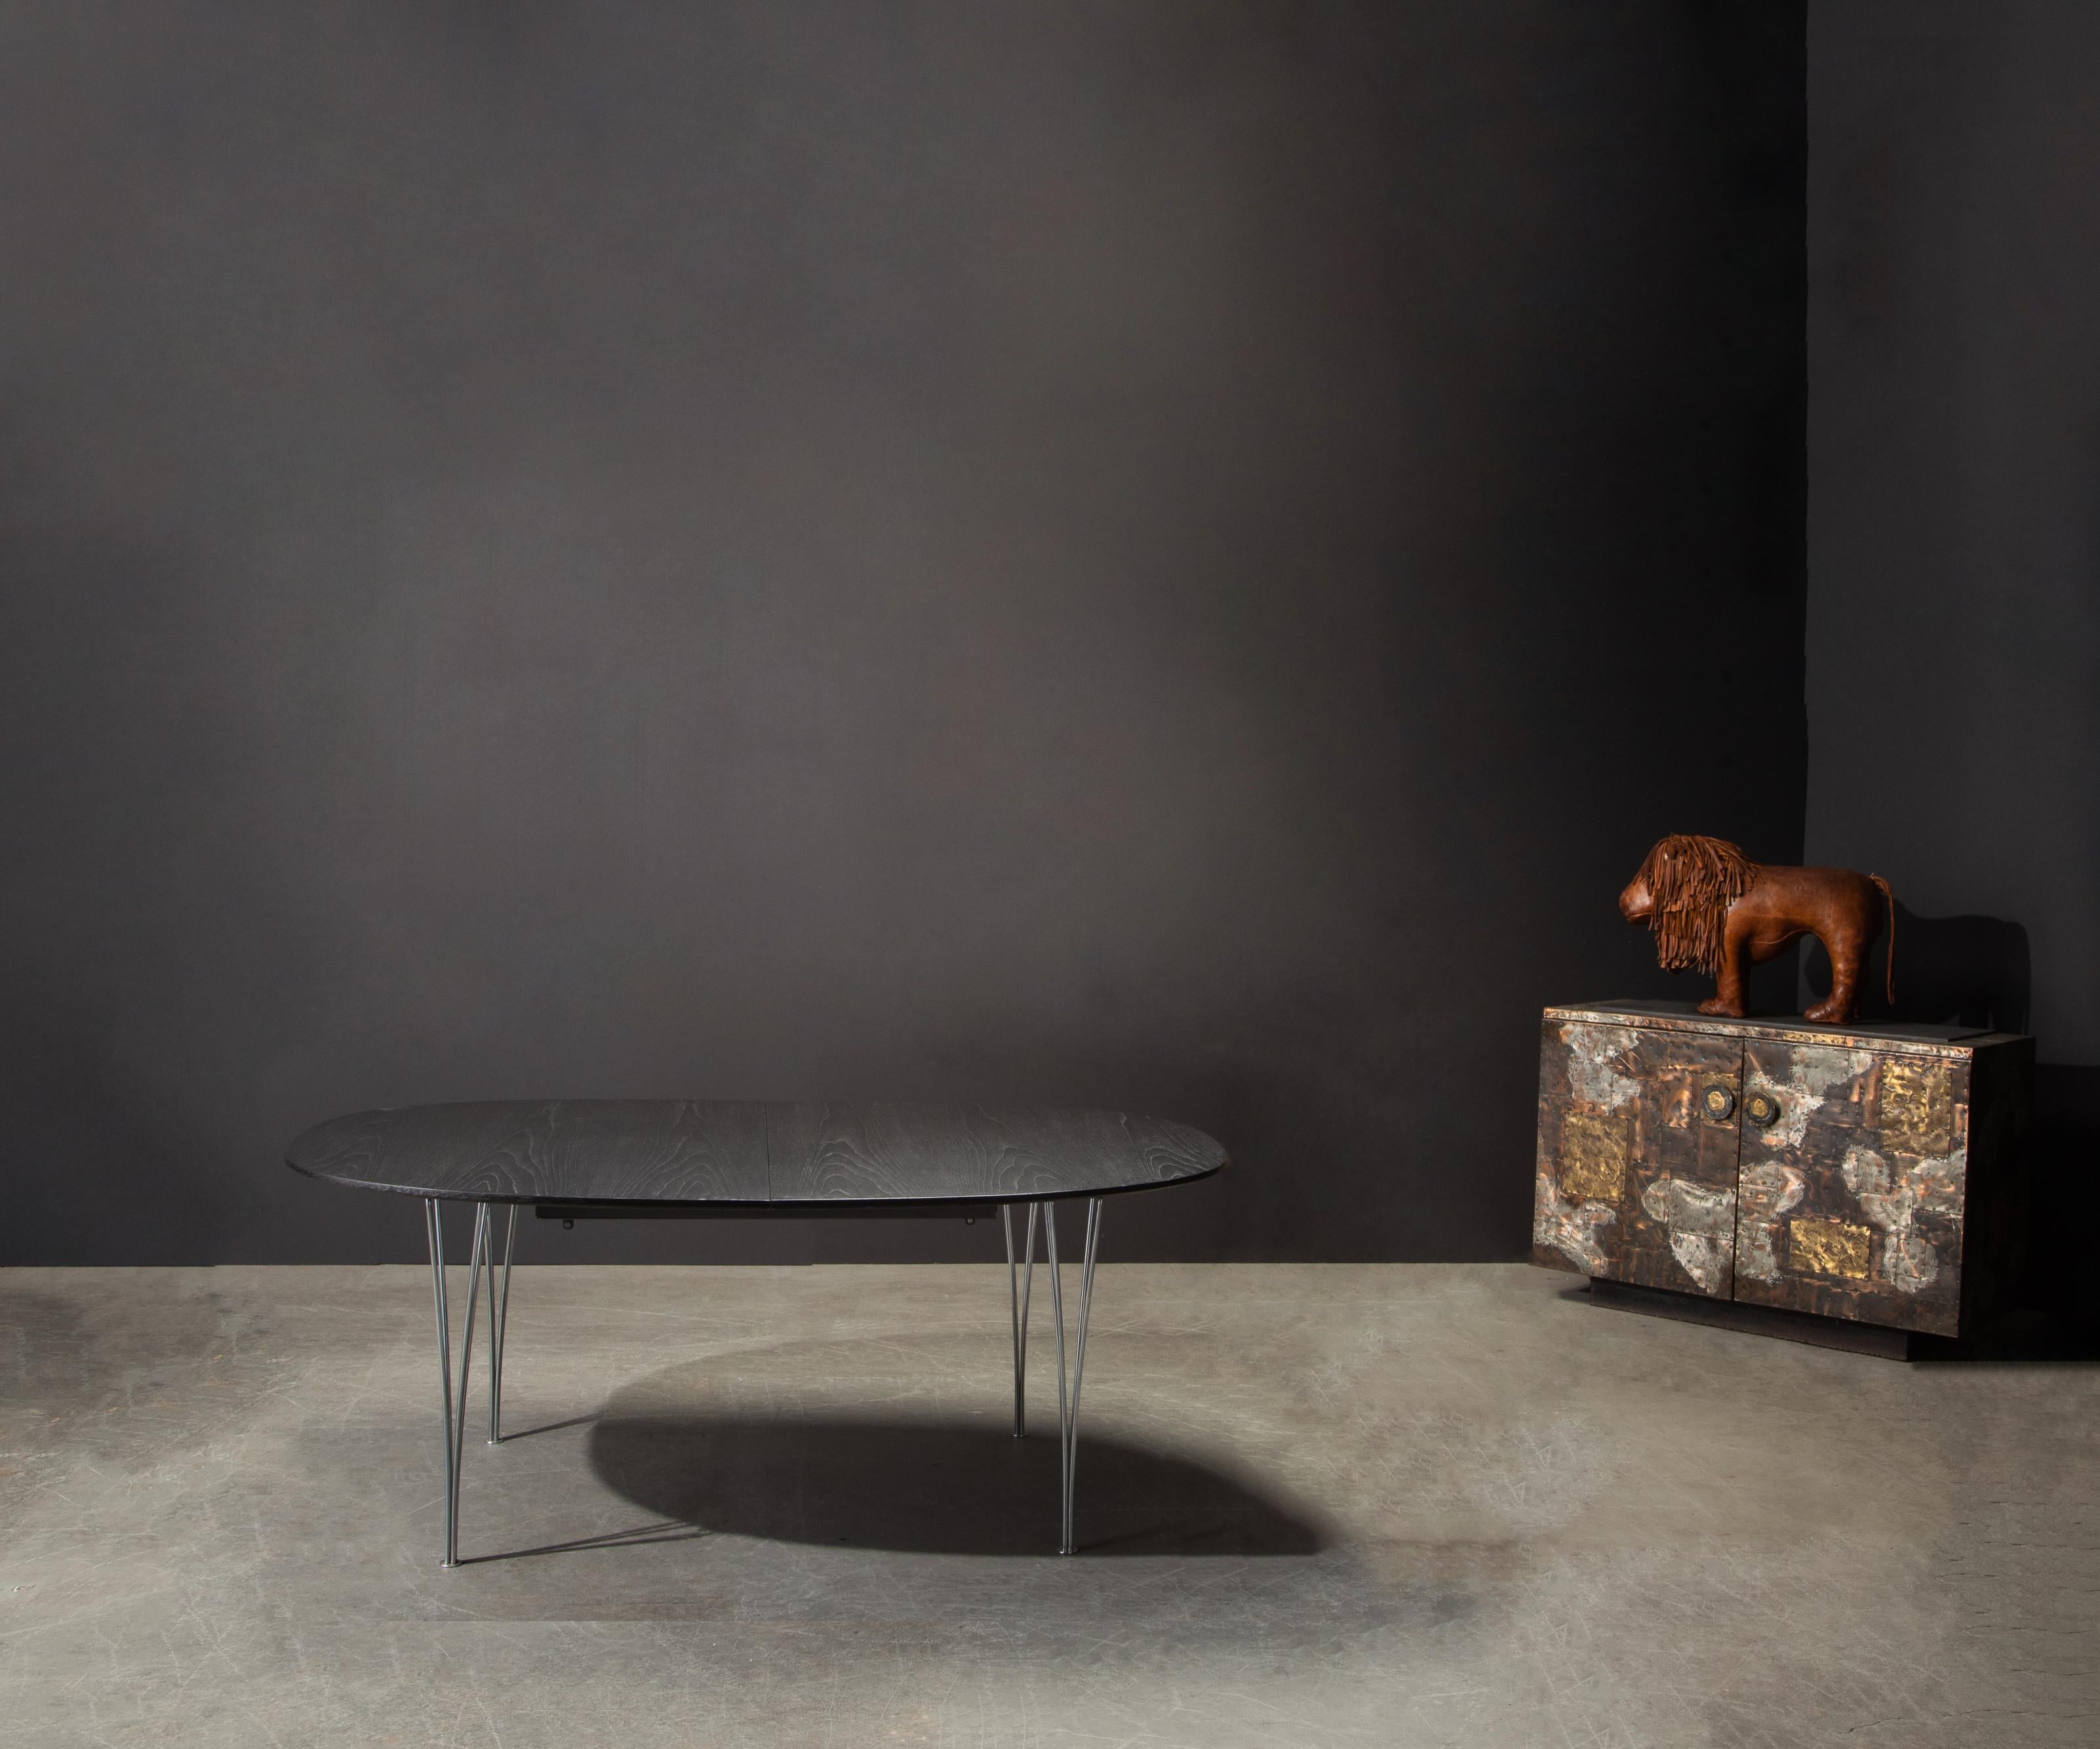 This beautifully restored table is the Super Ellipse Elliptical table by Piet Hein for Fritz Hansen, signed and dated 1973, comes with 3 leaves that transform the table to a monumental 117